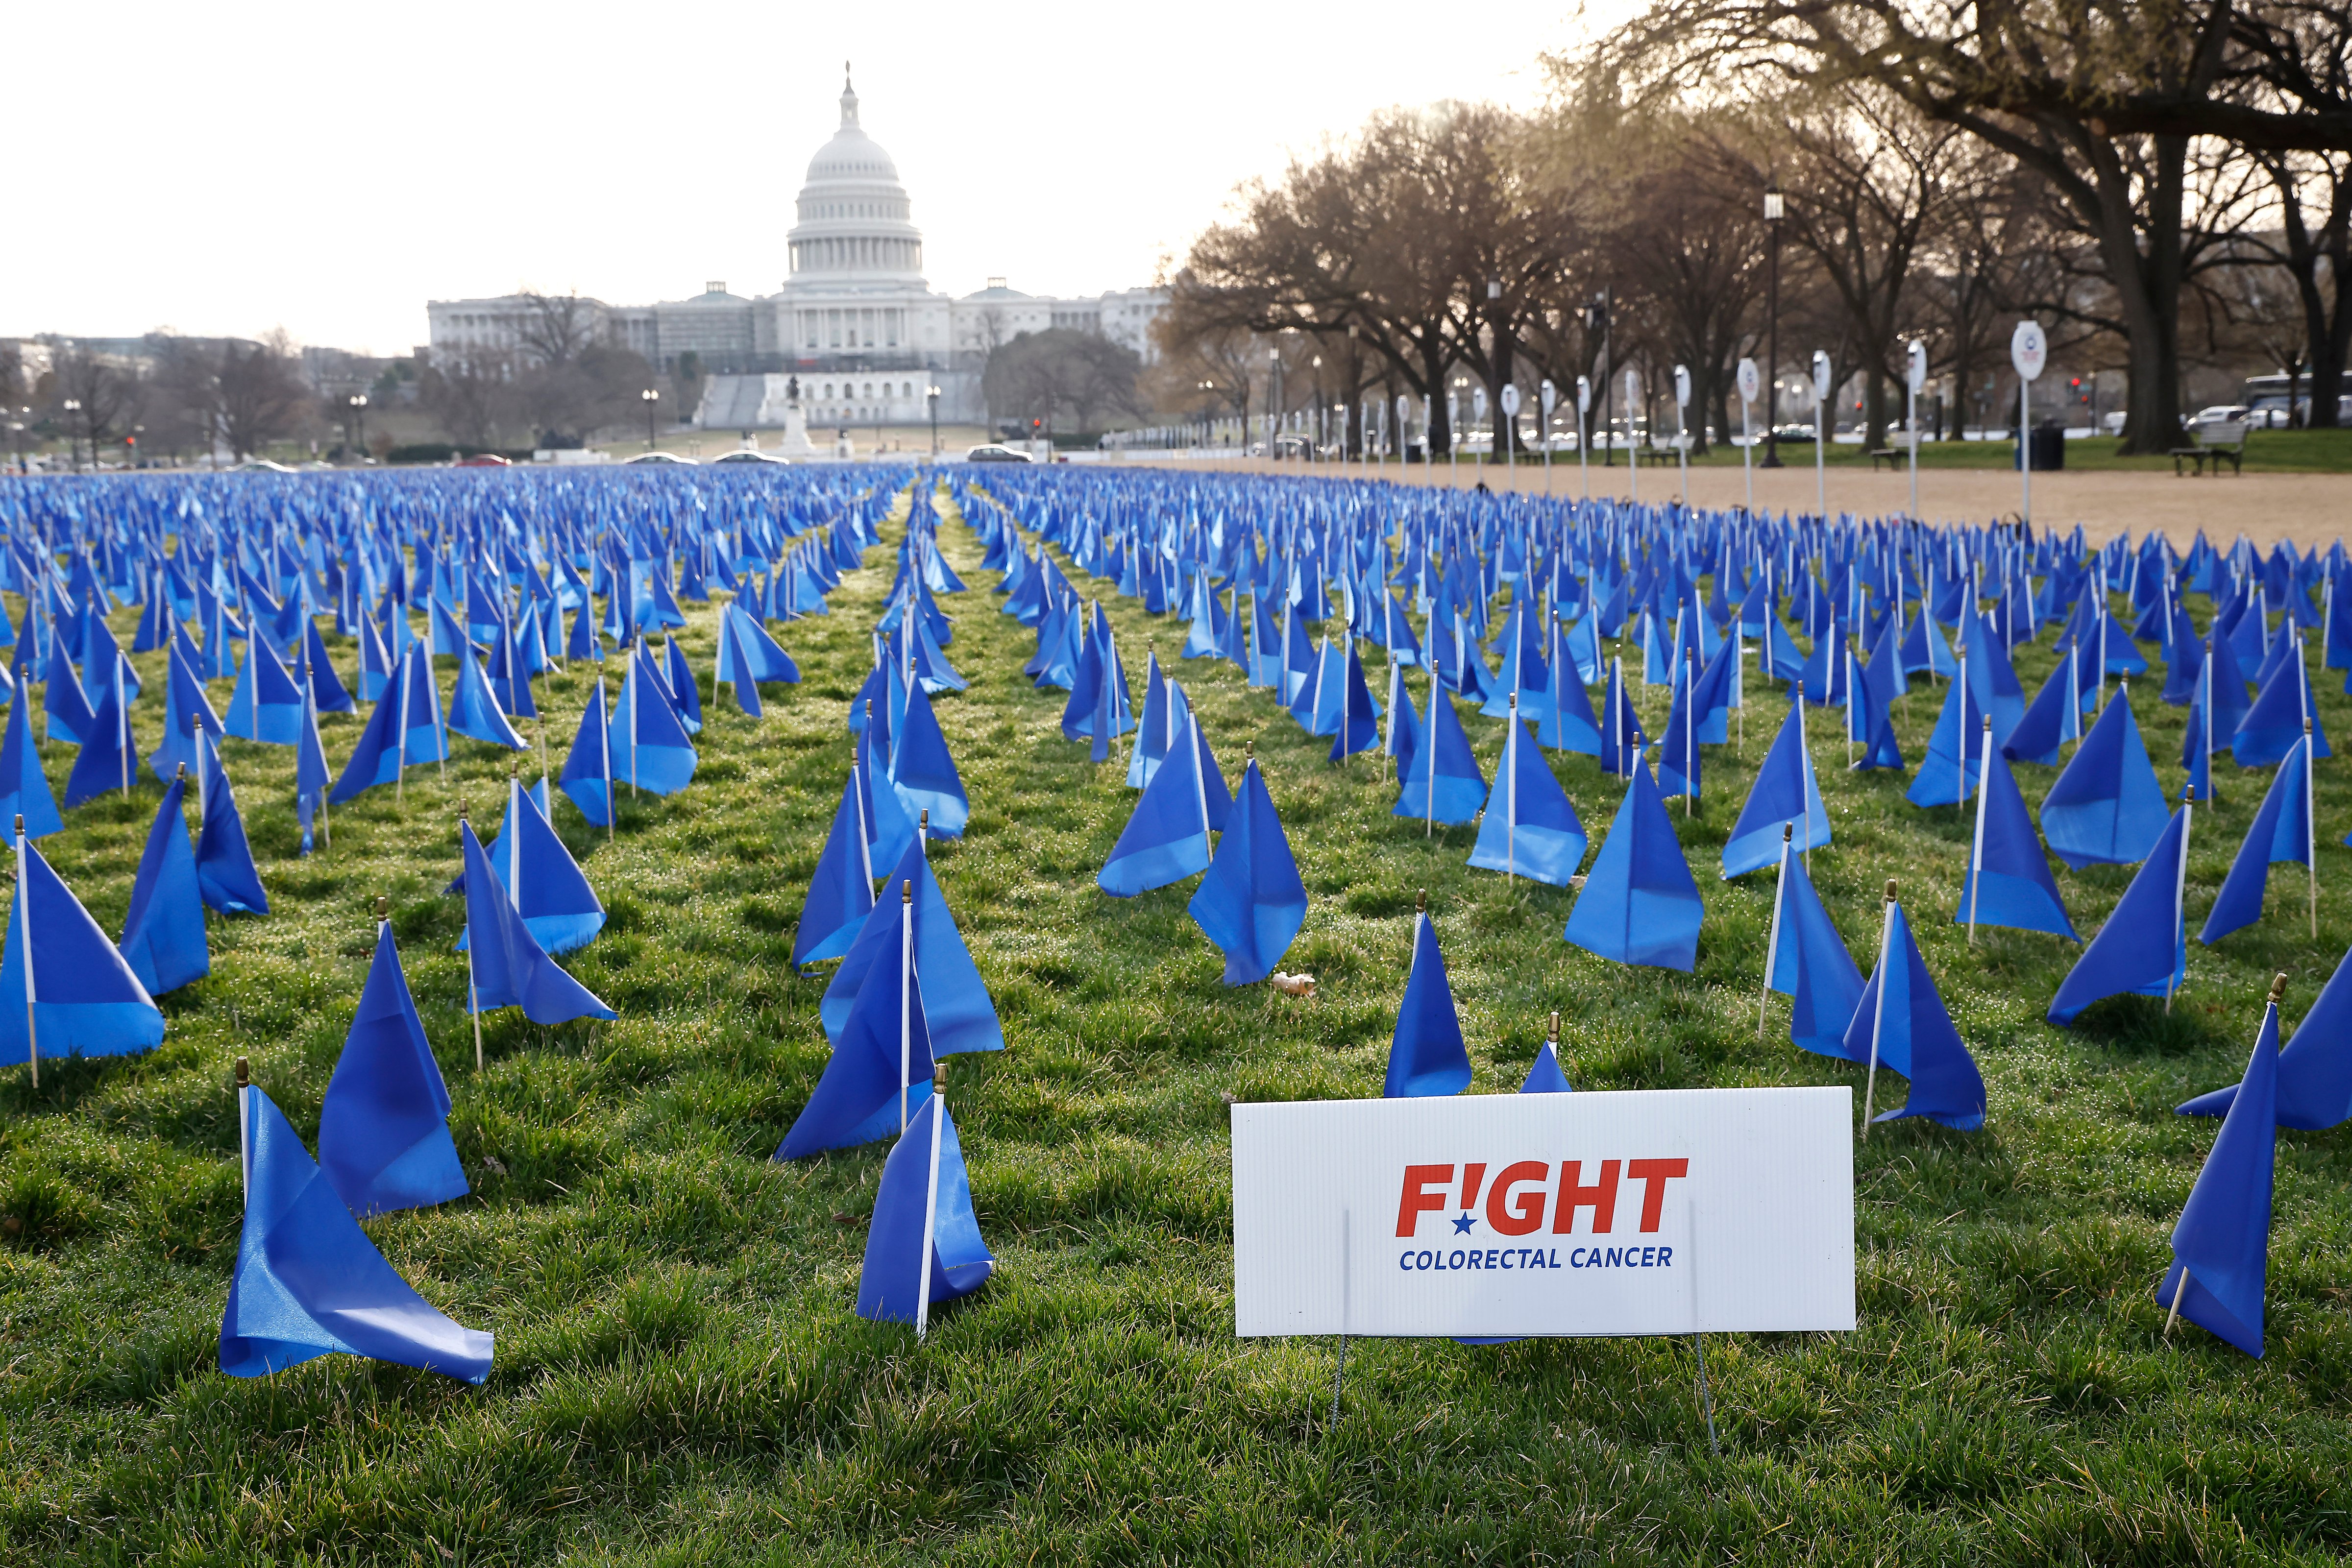 The United In Blue installation on the National Mall to raise awareness f the need for more colorectal cancer research, treatment options, and funding on March 16, 2022 in Washington, D.C. (Paul Morigi—Getty Images for Fight Colorectal Cancer)